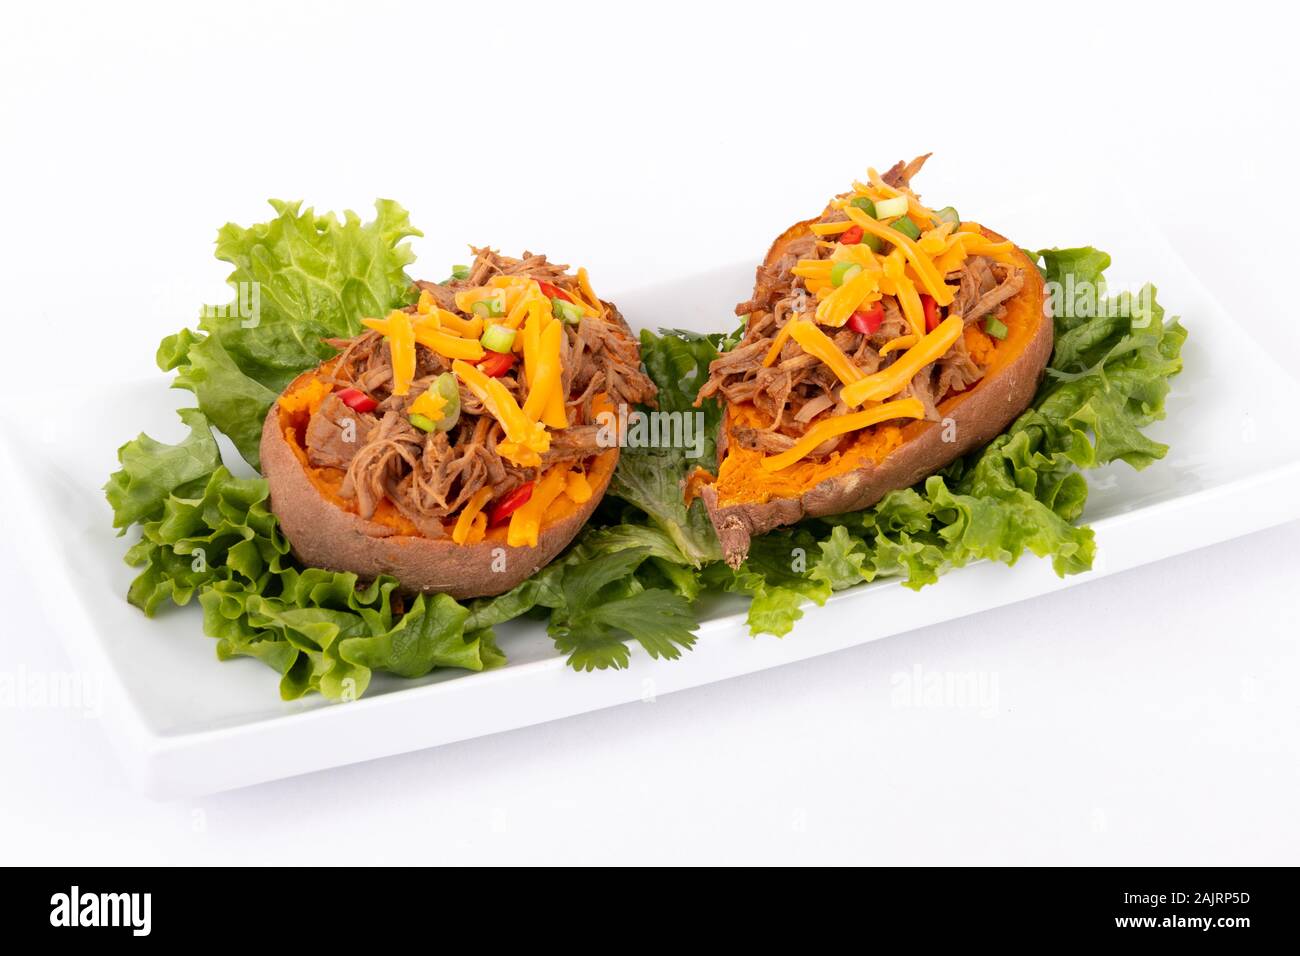 delicious spicy pulled pork stuffed sweet potato skin yam dish over white background Stock Photo